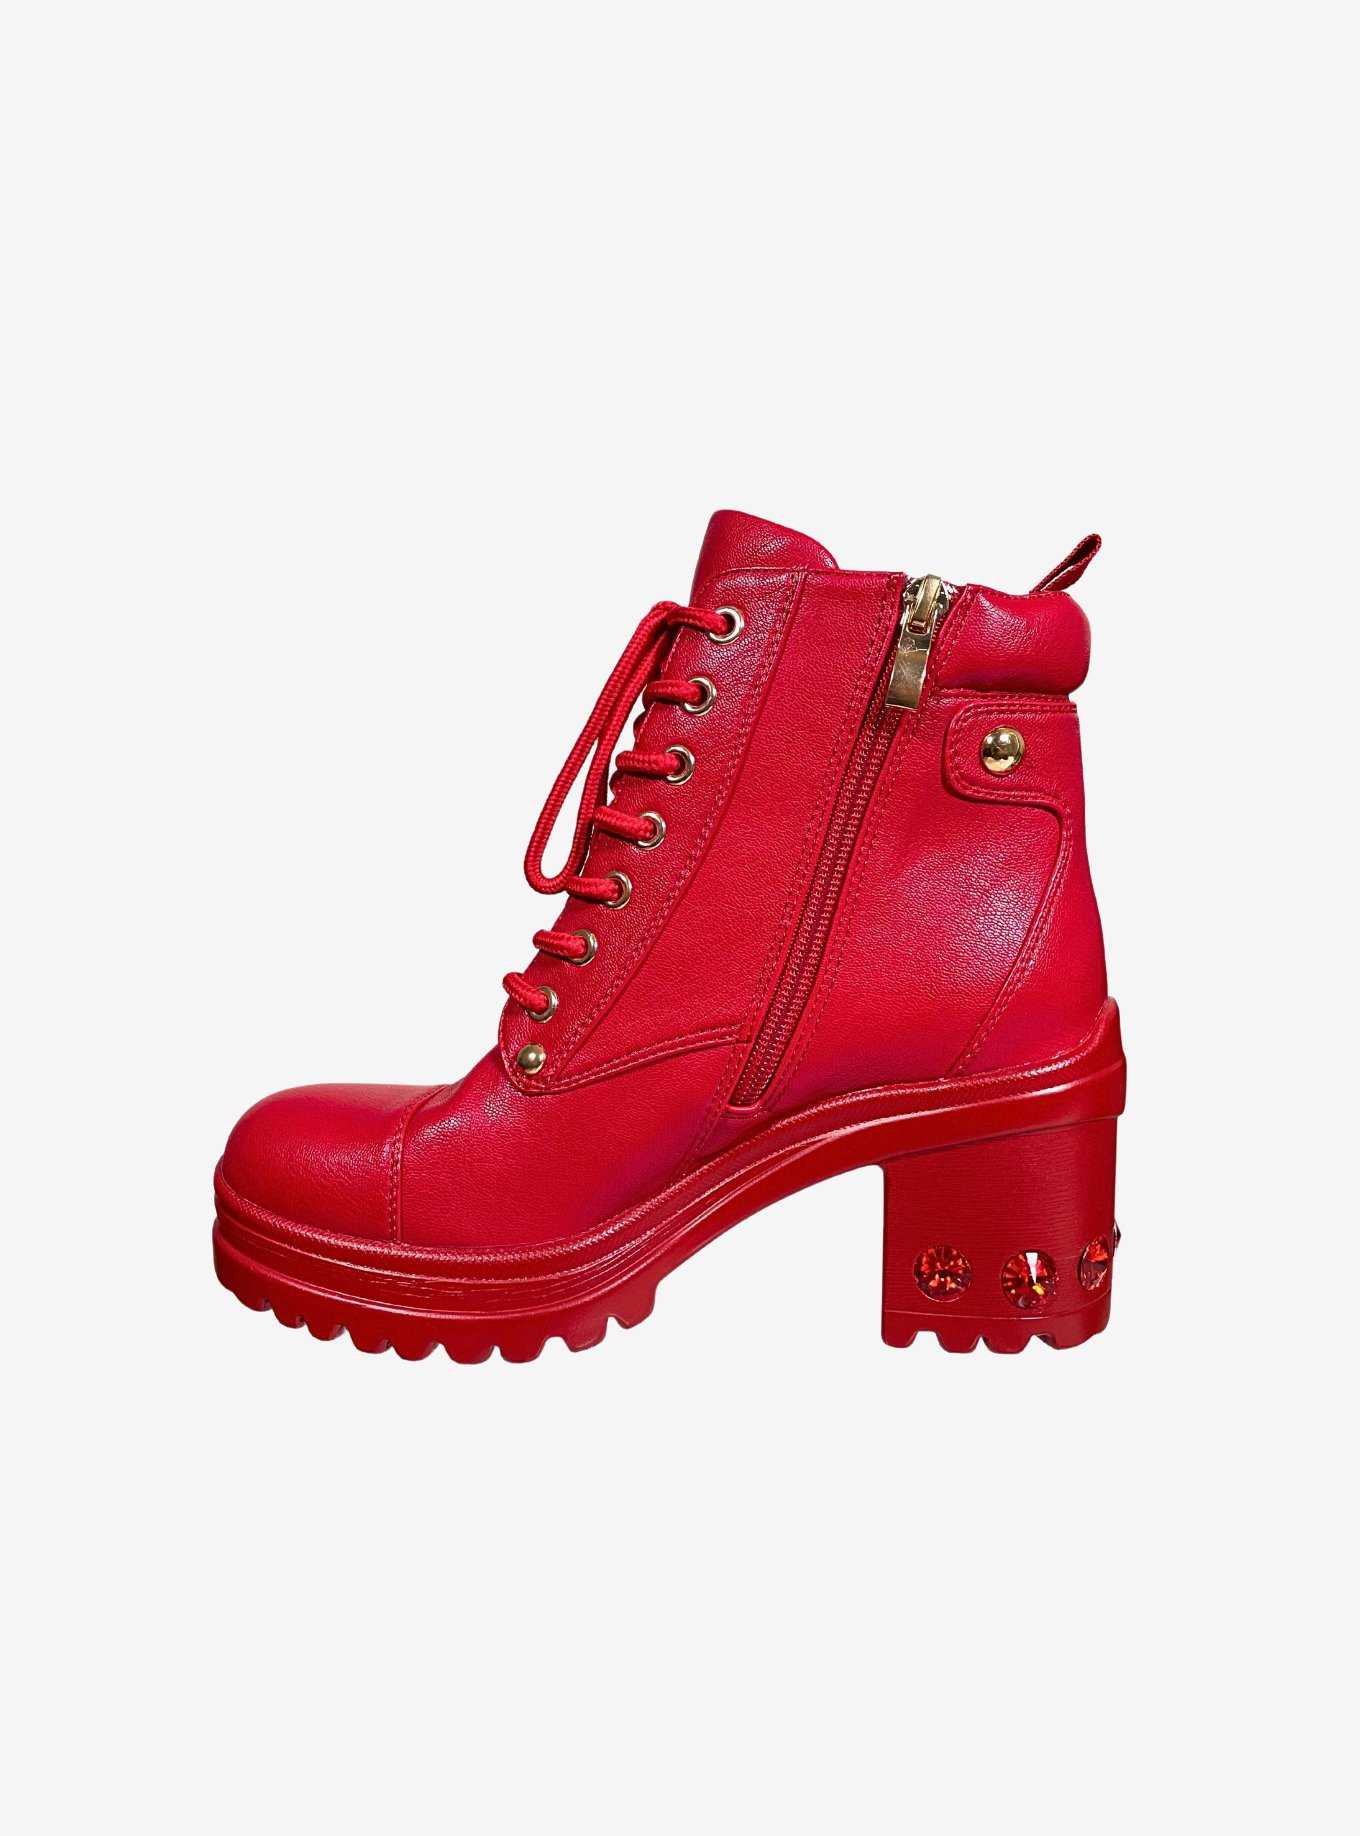 Thunder Bootie Red, , hi-res